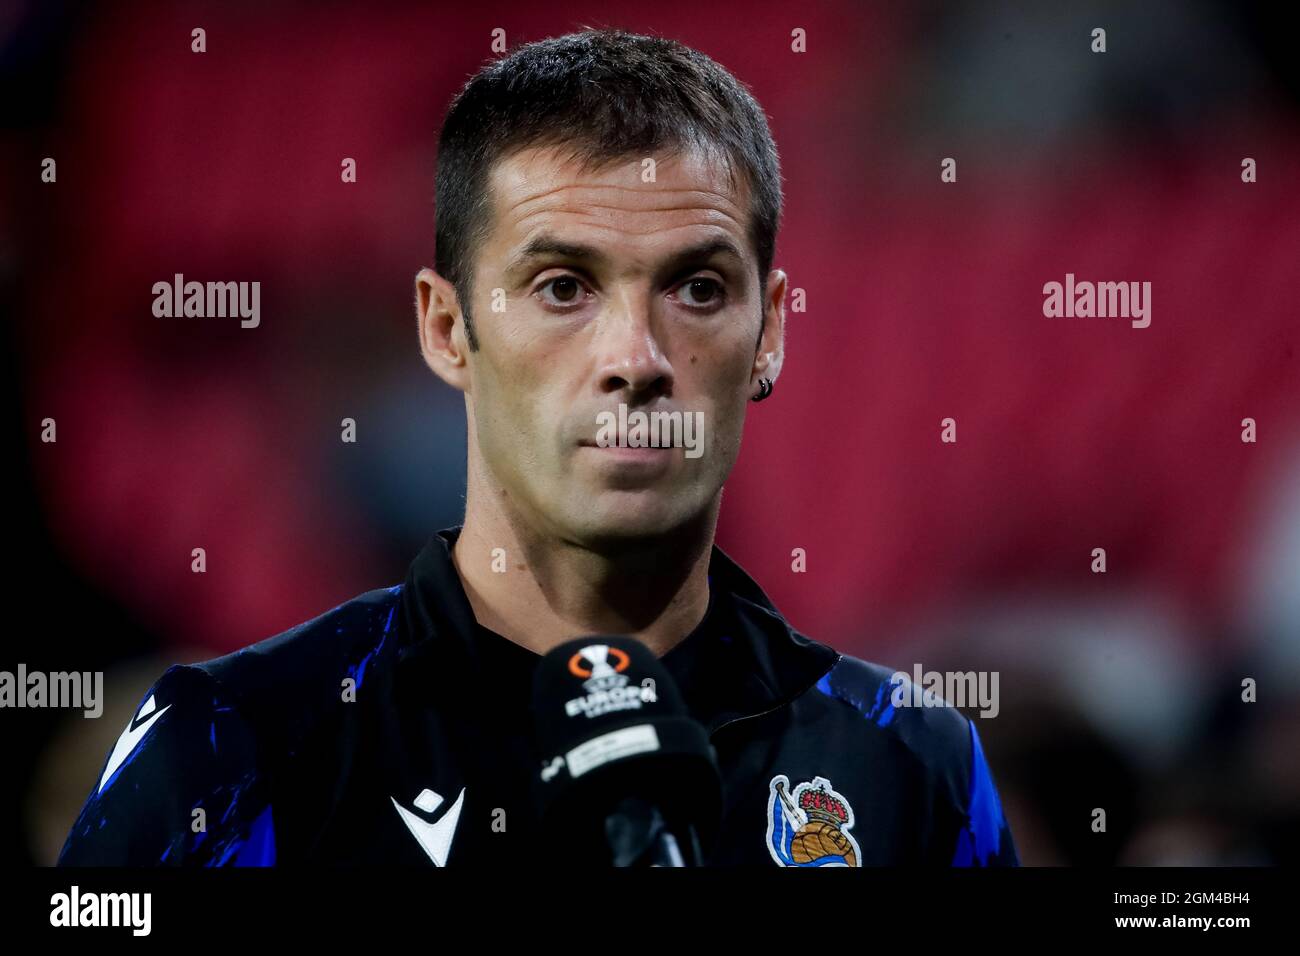 Eindhoven, Netherlands. 16th Sep, 2021. EINDHOVEN, NETHERLANDS - SEPTEMBER 16: Coach Imanol Alguacil of Real Sociedad during the UEFA Europa League Group Stage match between PSV and Real Sociedad at the Phillips Stadion on September 16, 2021 in Eindhoven, Netherlands (Photo by Broer van den Boom/Orange Pictures) Credit: Orange Pics BV/Alamy Live News Stock Photo